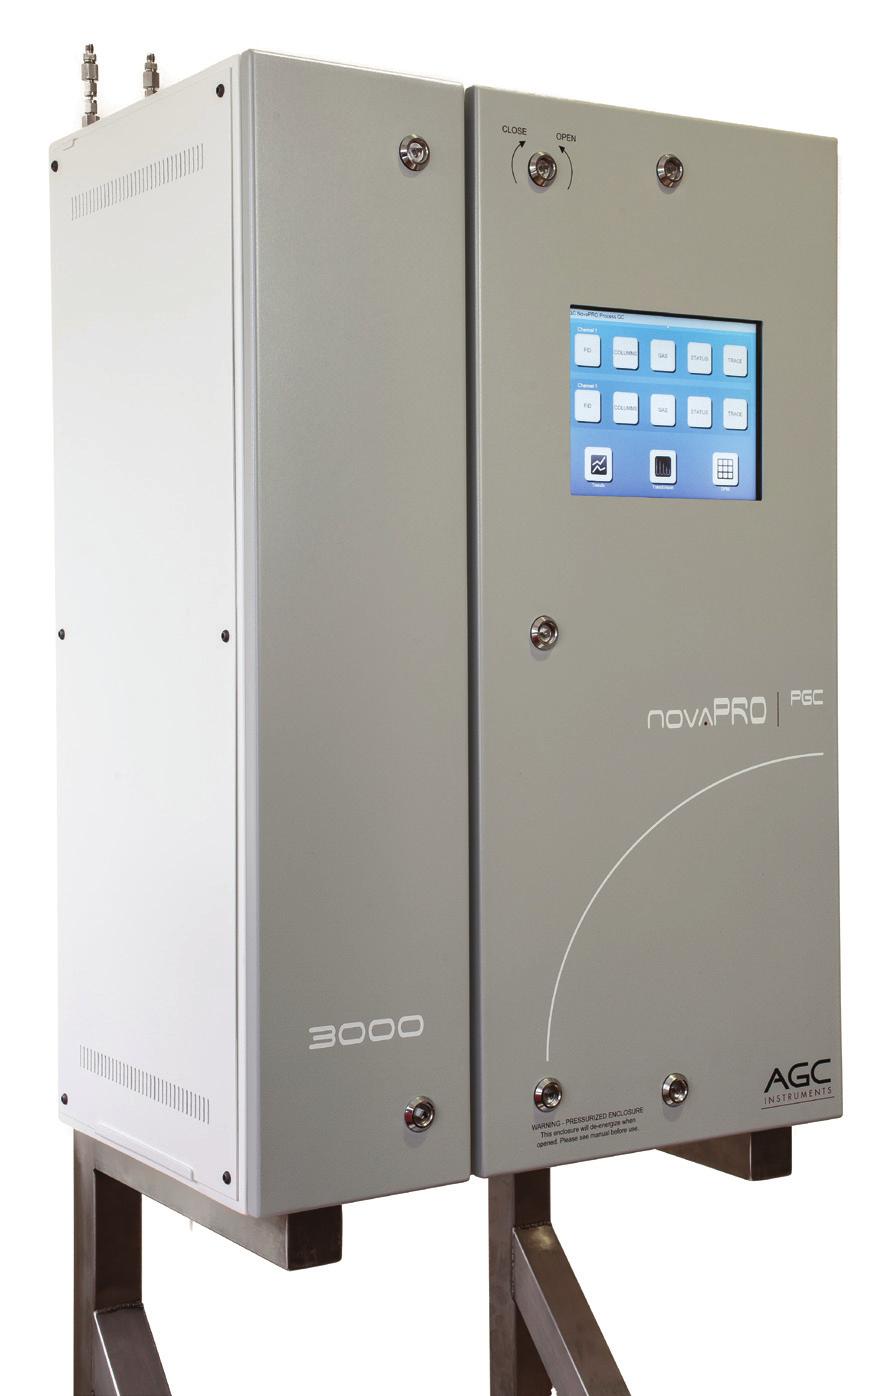 Features Explosion Proof for use in Zone 1 and Zone 2 Cabinet fitted with Purge Controller to EExP standards Uses the Gönnheimer Exp-system Controllers which are proved according to EN 60079 (BVS 06